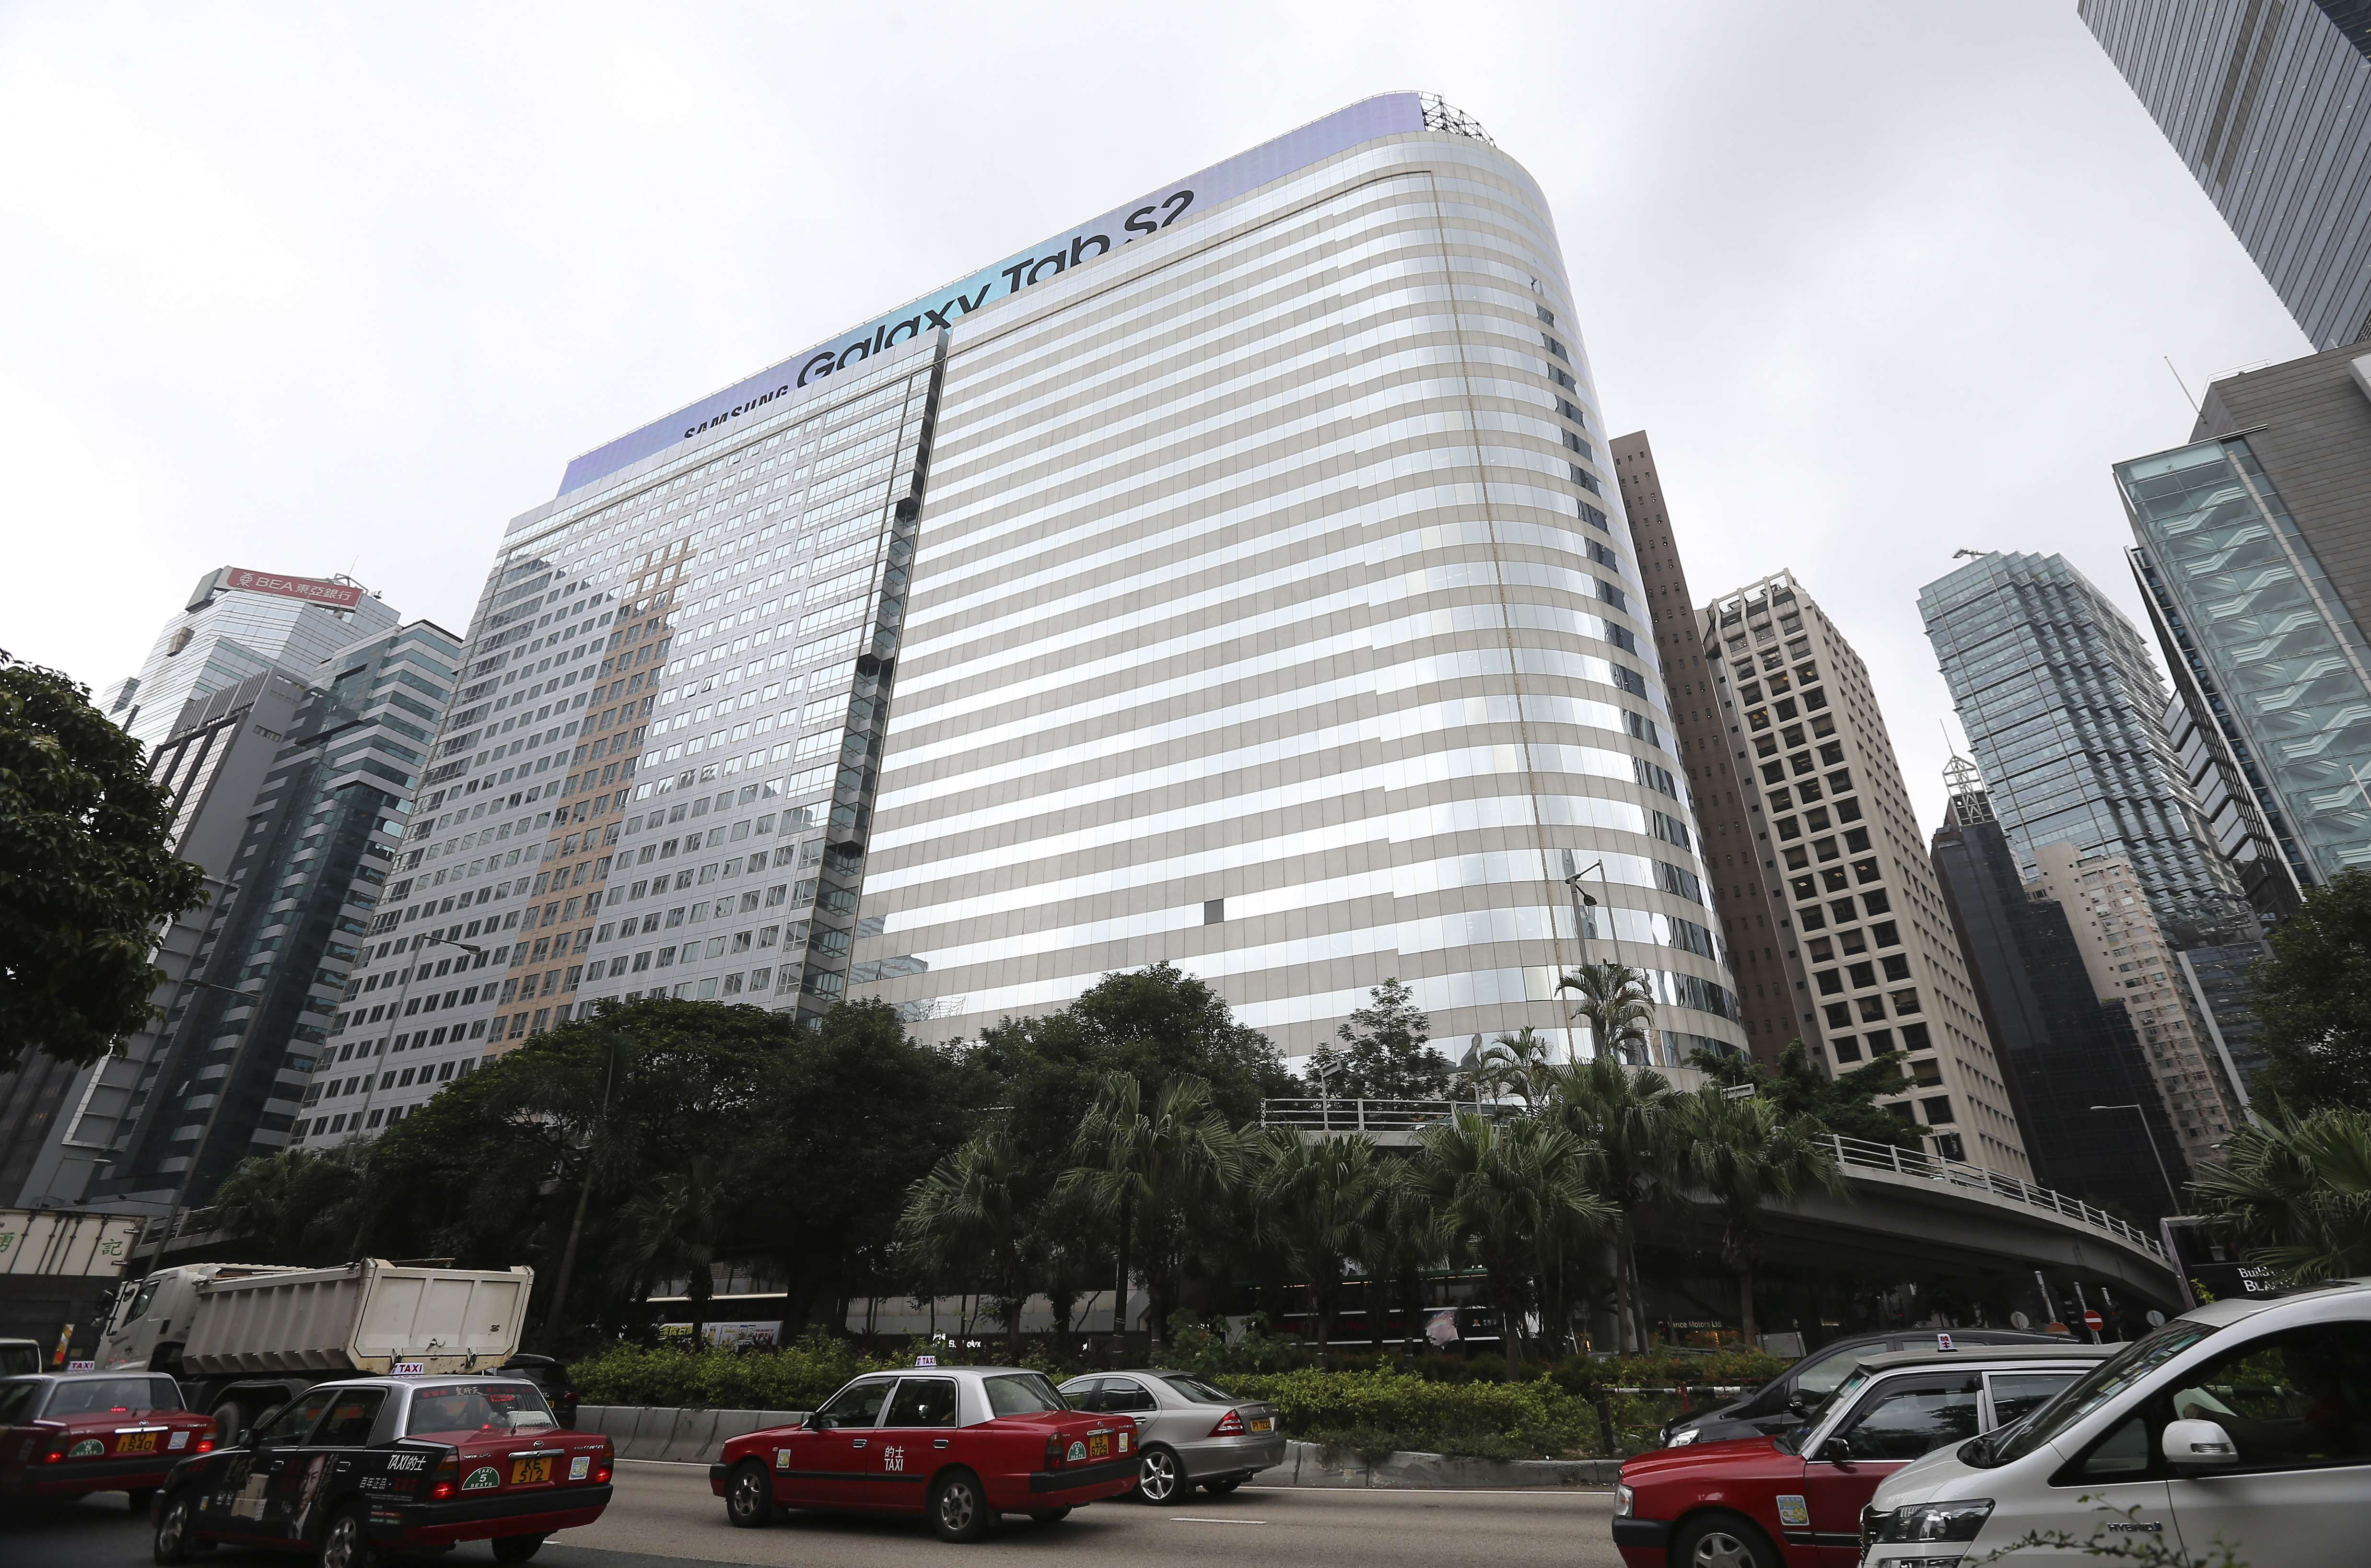 Mass Mutual Tower in Wanchai was acquired by mainland-based developer Evergrande for HK$12.5 billion, the largest amount ever paid for an office building in the city, last year. Photo: Dickson Lee